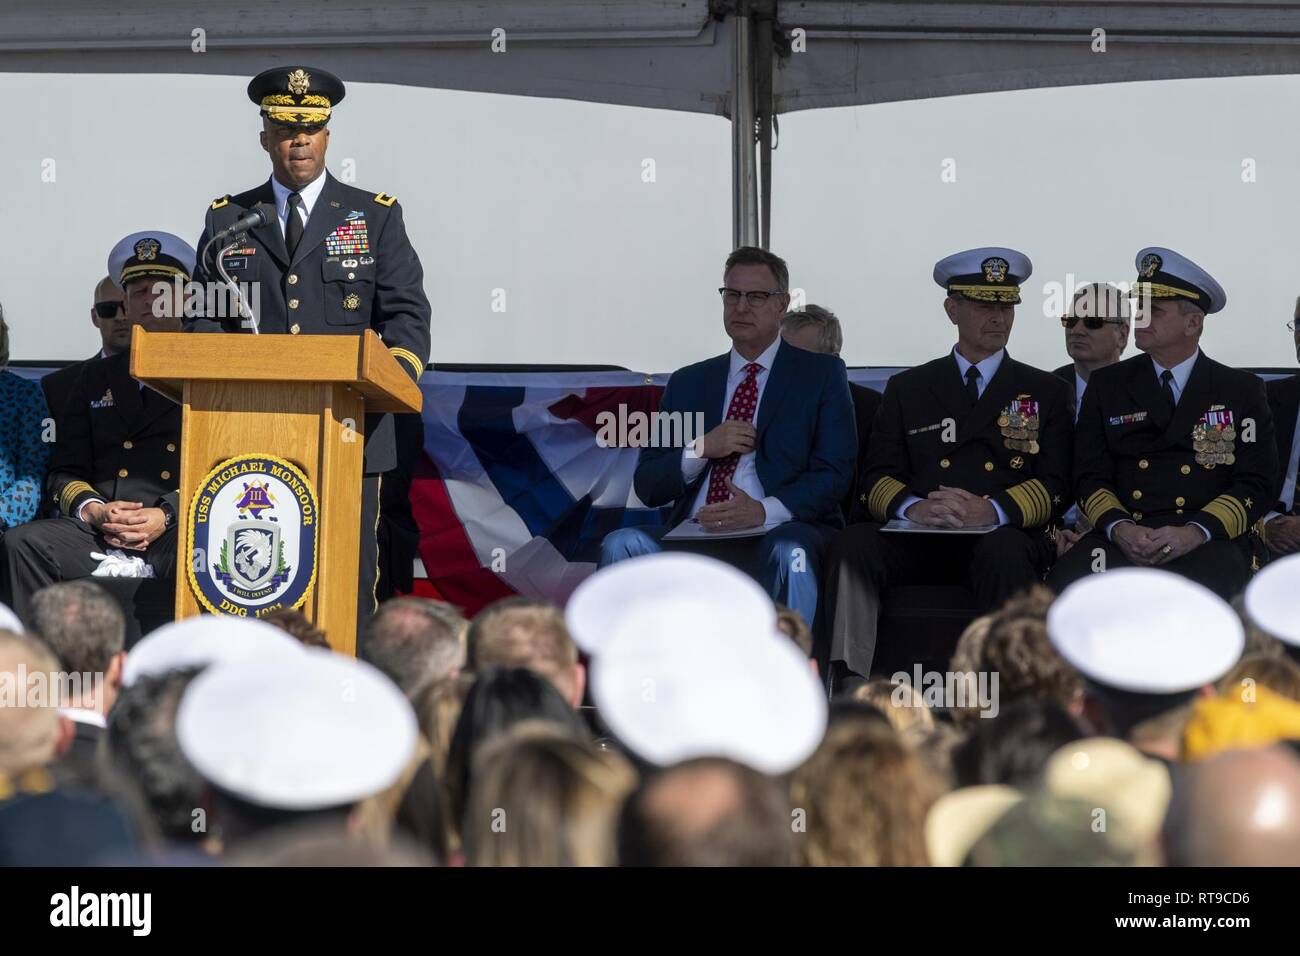 SAN DIEGO (Jan. 26, 2019) U.S. Army Maj. Gen. Ronald P. Clark, Commanding General, 25th Infantry Division, gives his remarks during the commissioning ceremony of USS Michael Monsoor (DDG 1001). DDG 1001 is the second Zumwalt-class destroyer ship to enter the fleet. It is the first Navy combat ship named for fallen Master-at-Arms 2nd Class (SEAL) Michael Monsoor, who was posthumously awarded the Medal of Honor for his heroic actions while serving in Ramadi, Iraq, in 2006. Stock Photo